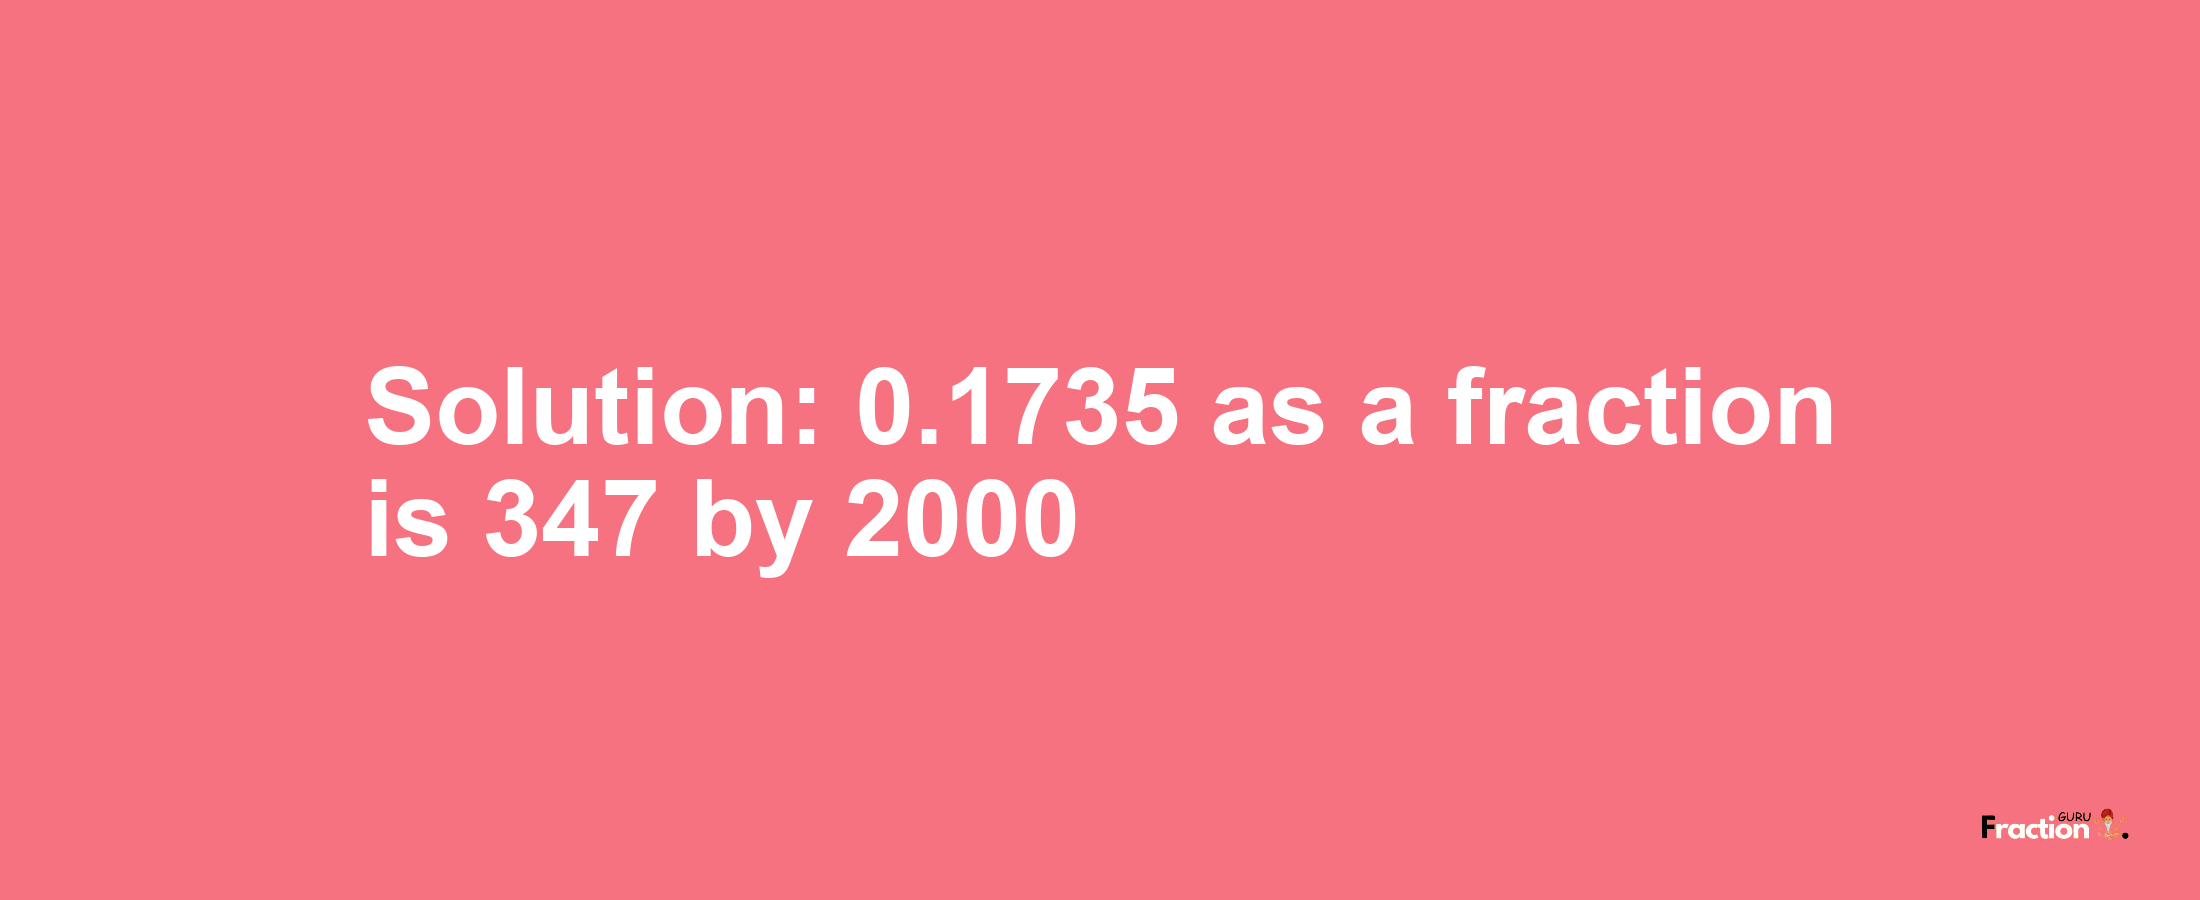 Solution:0.1735 as a fraction is 347/2000